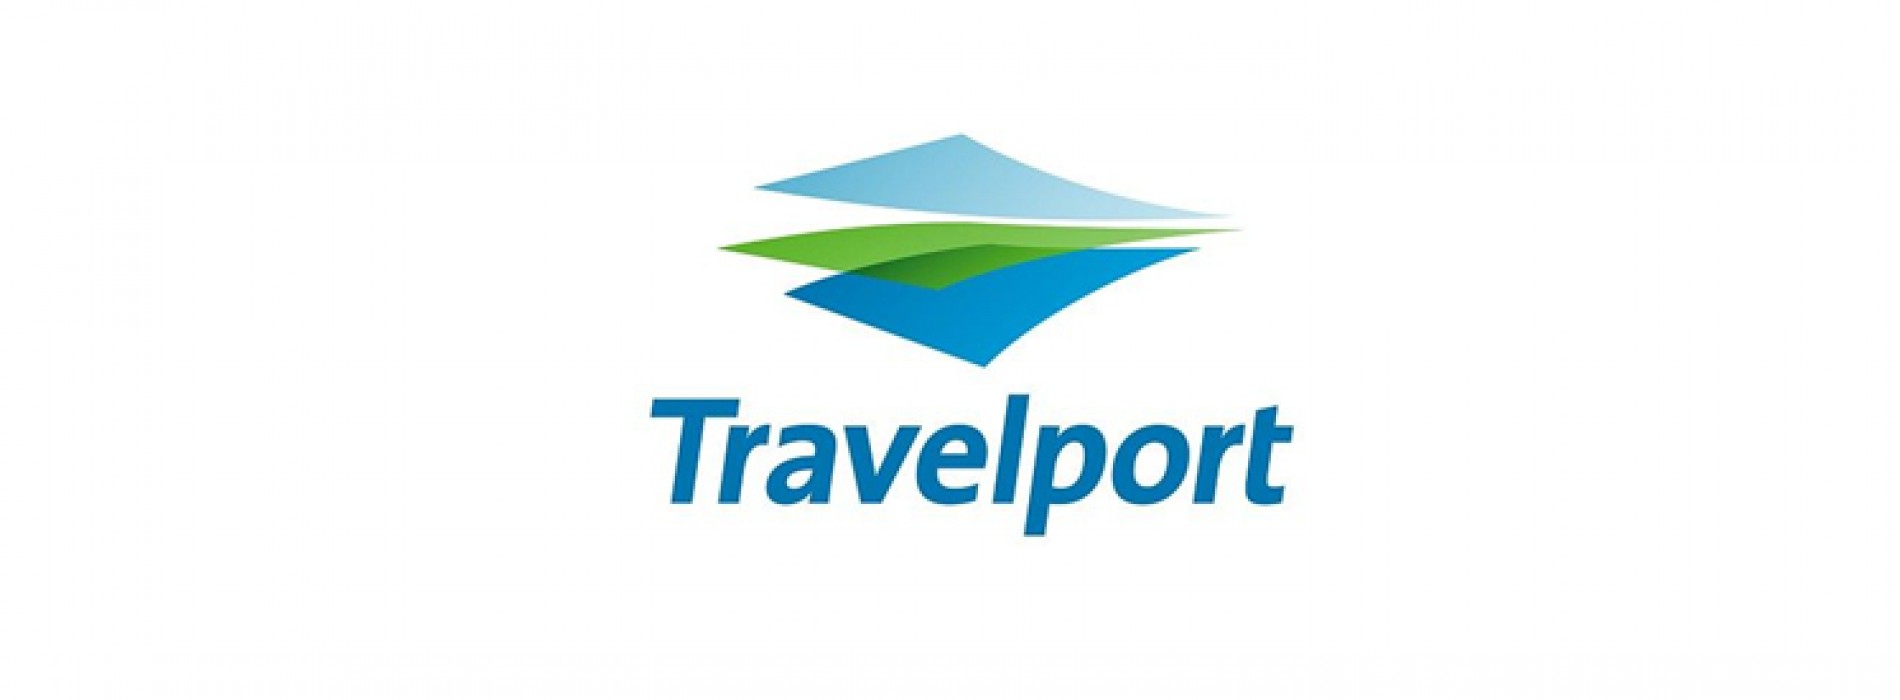 Travelport Rich Content and Branding Reaches First Anniversary